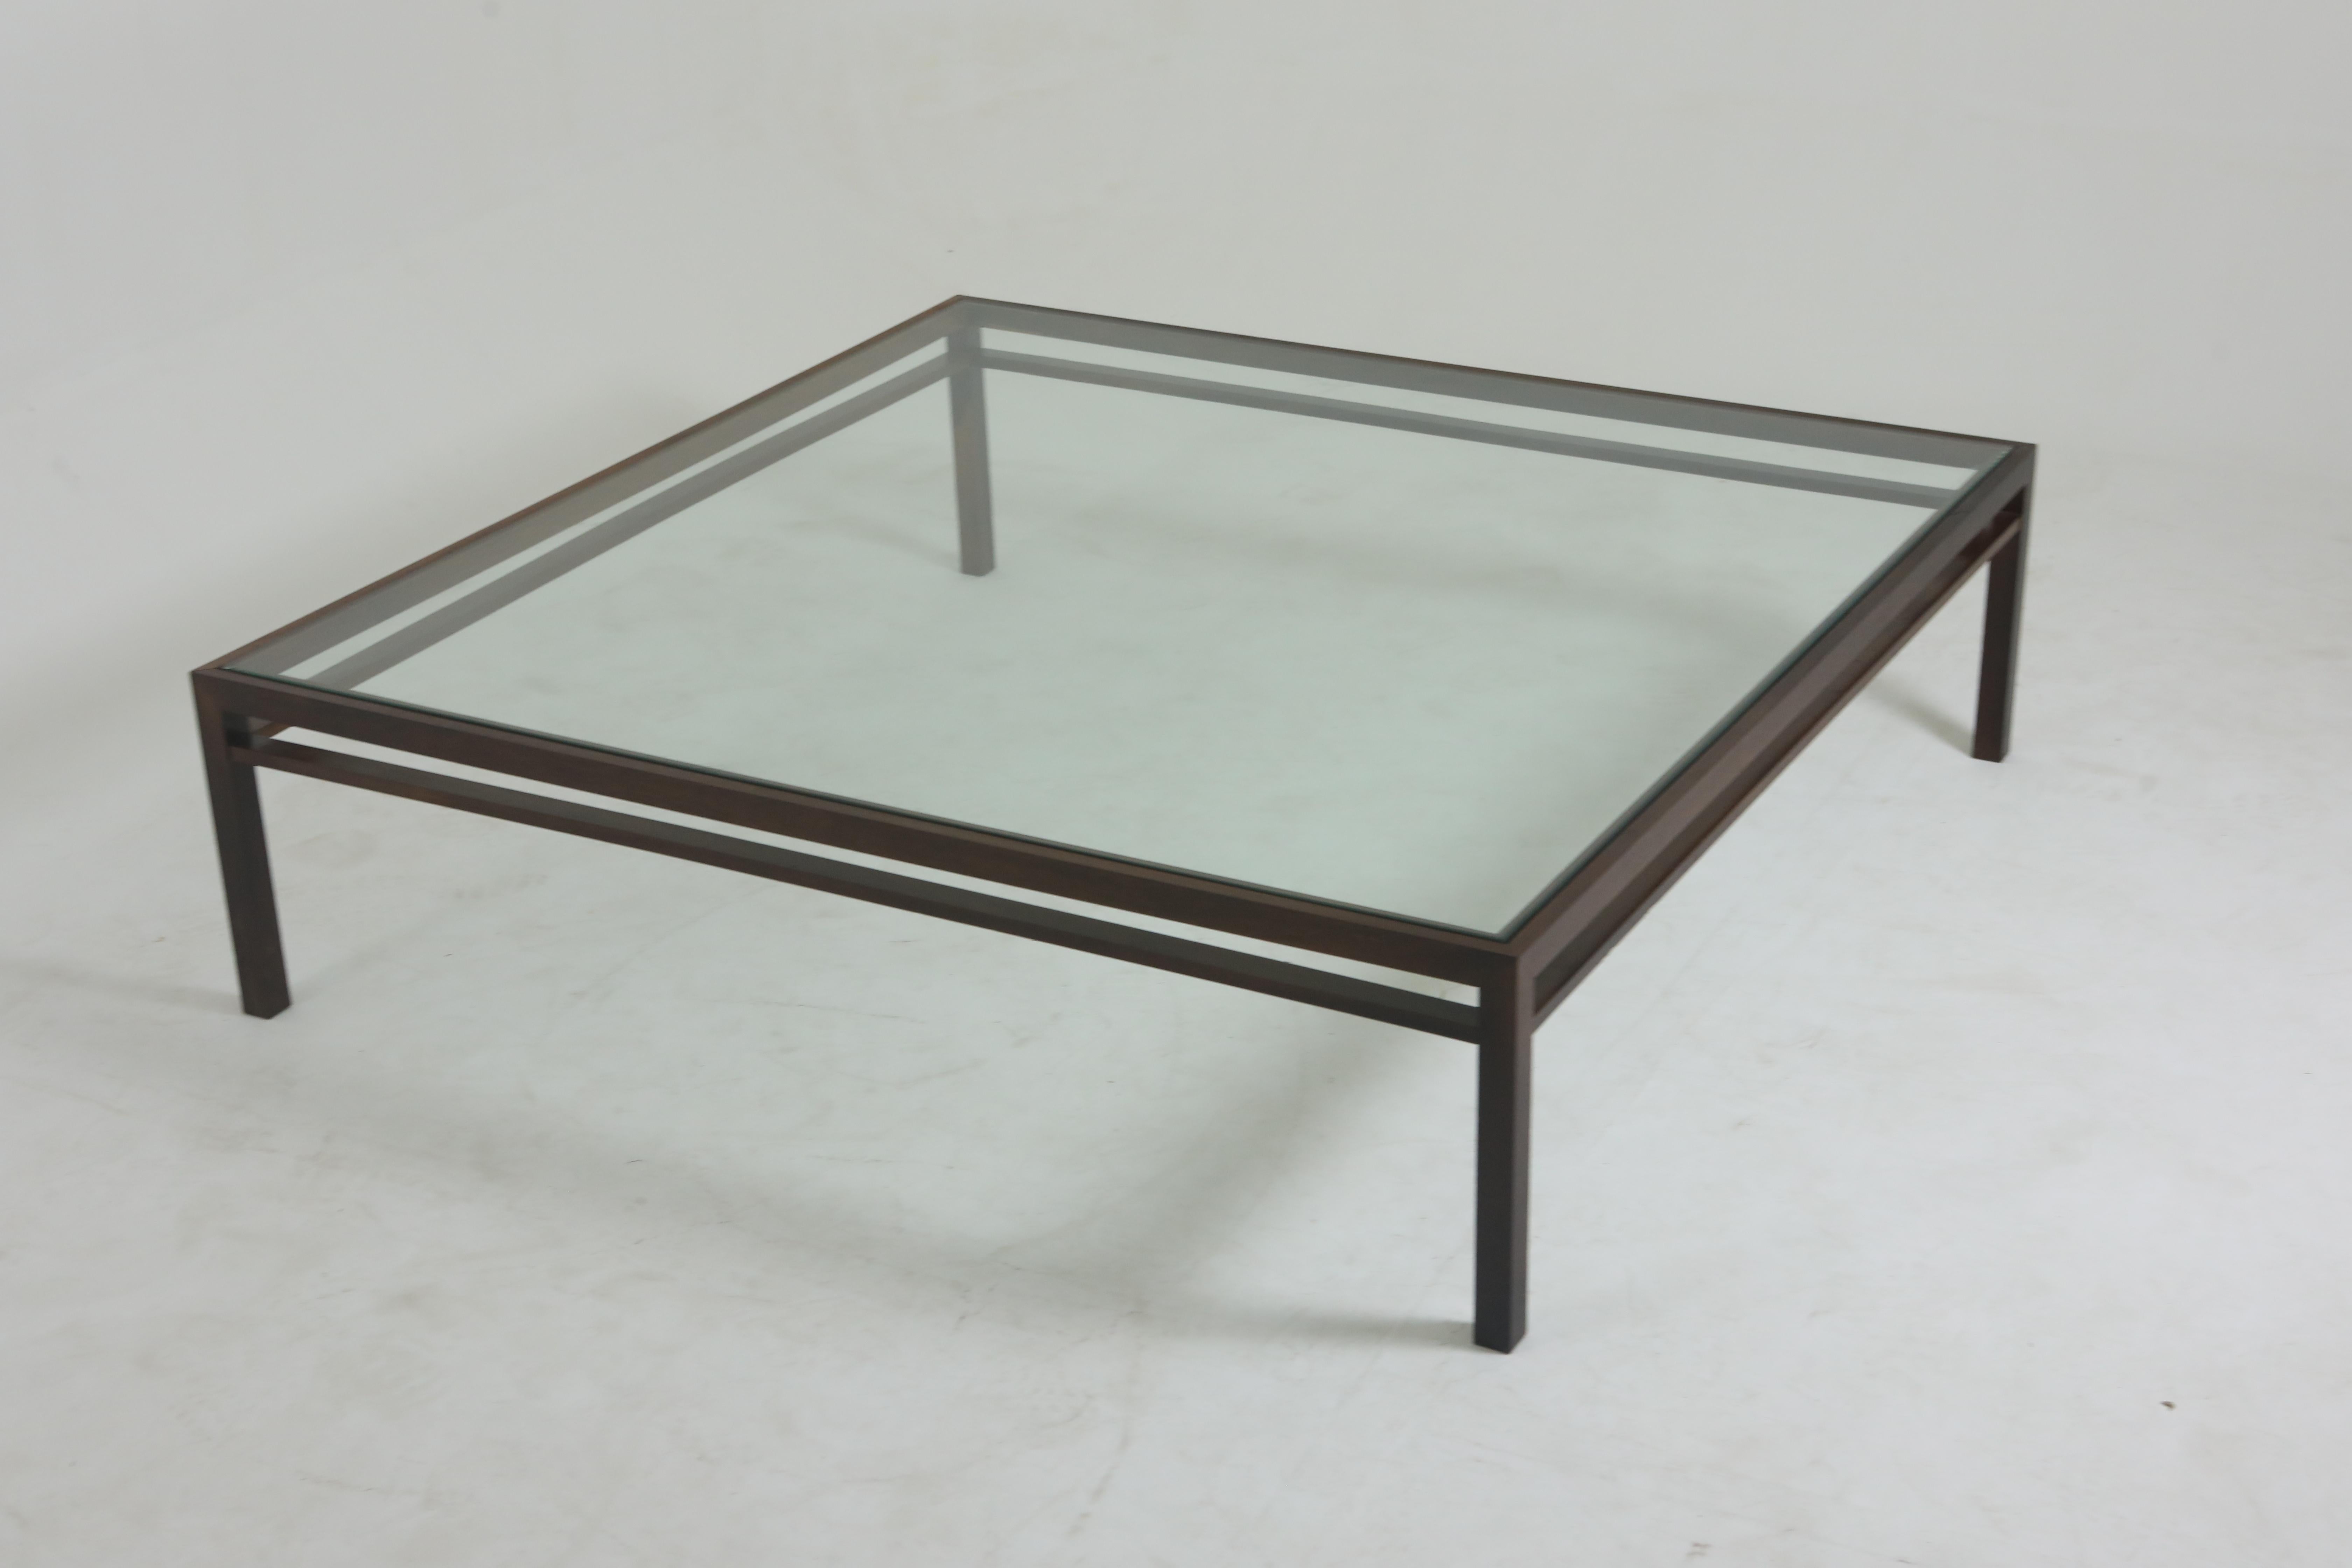 Mid-Century Modern Center Table by Joaquim Tenreiro, Brazil, 1960s

This square center table designed by the renowned Brazilian designer, Joaquim Tenreiro was crafted during the mid-20th century, and exemplifies the clean lines and understated